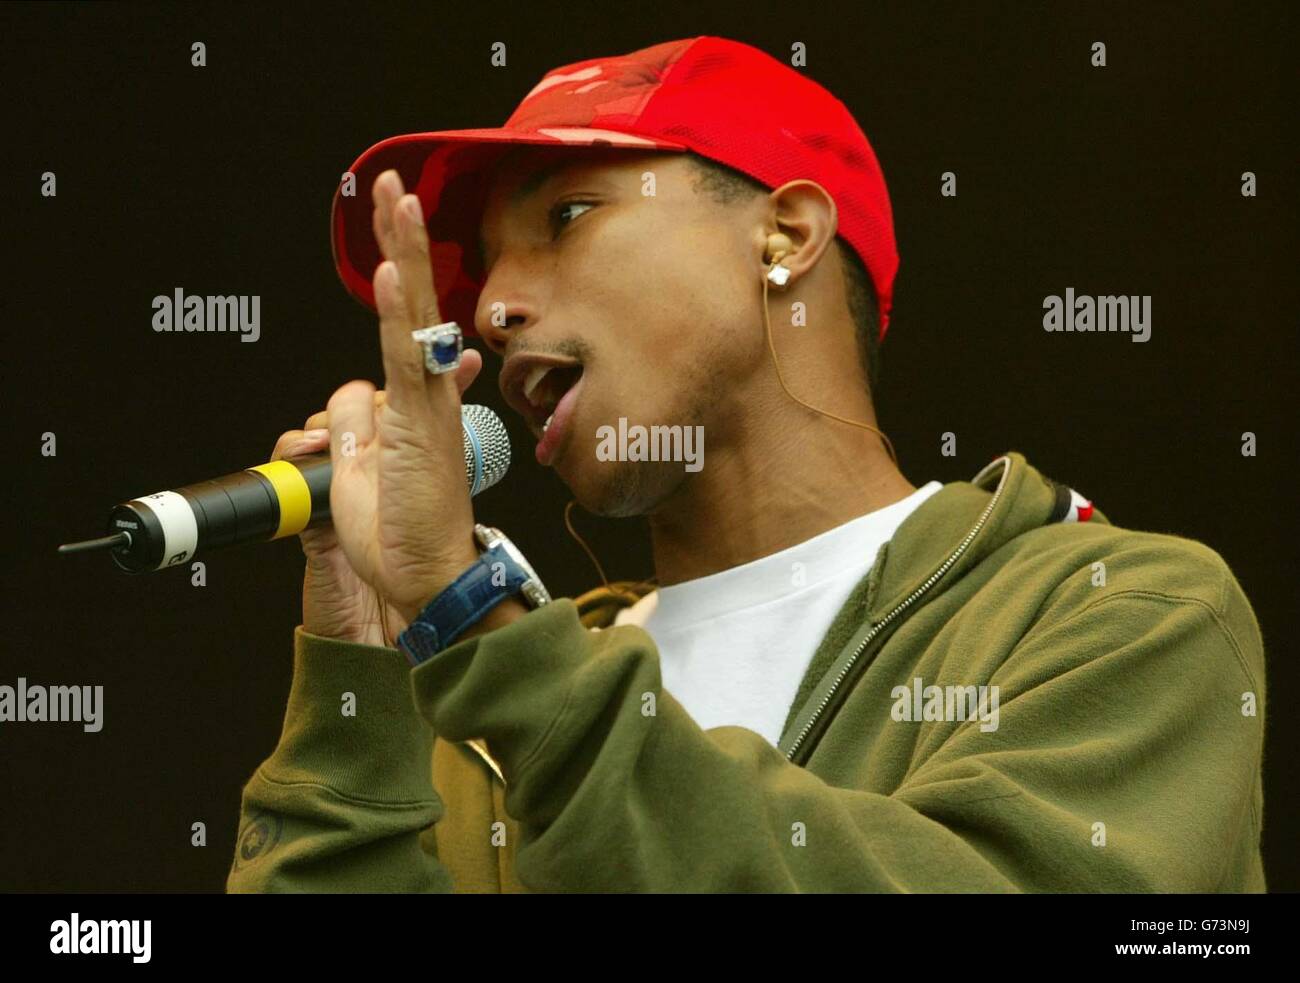 Lead singer Pharrell Williams of NERD on the NME stage during the second day of T in the Park, the two-day music festival event in Balado near Stirling. Stock Photo